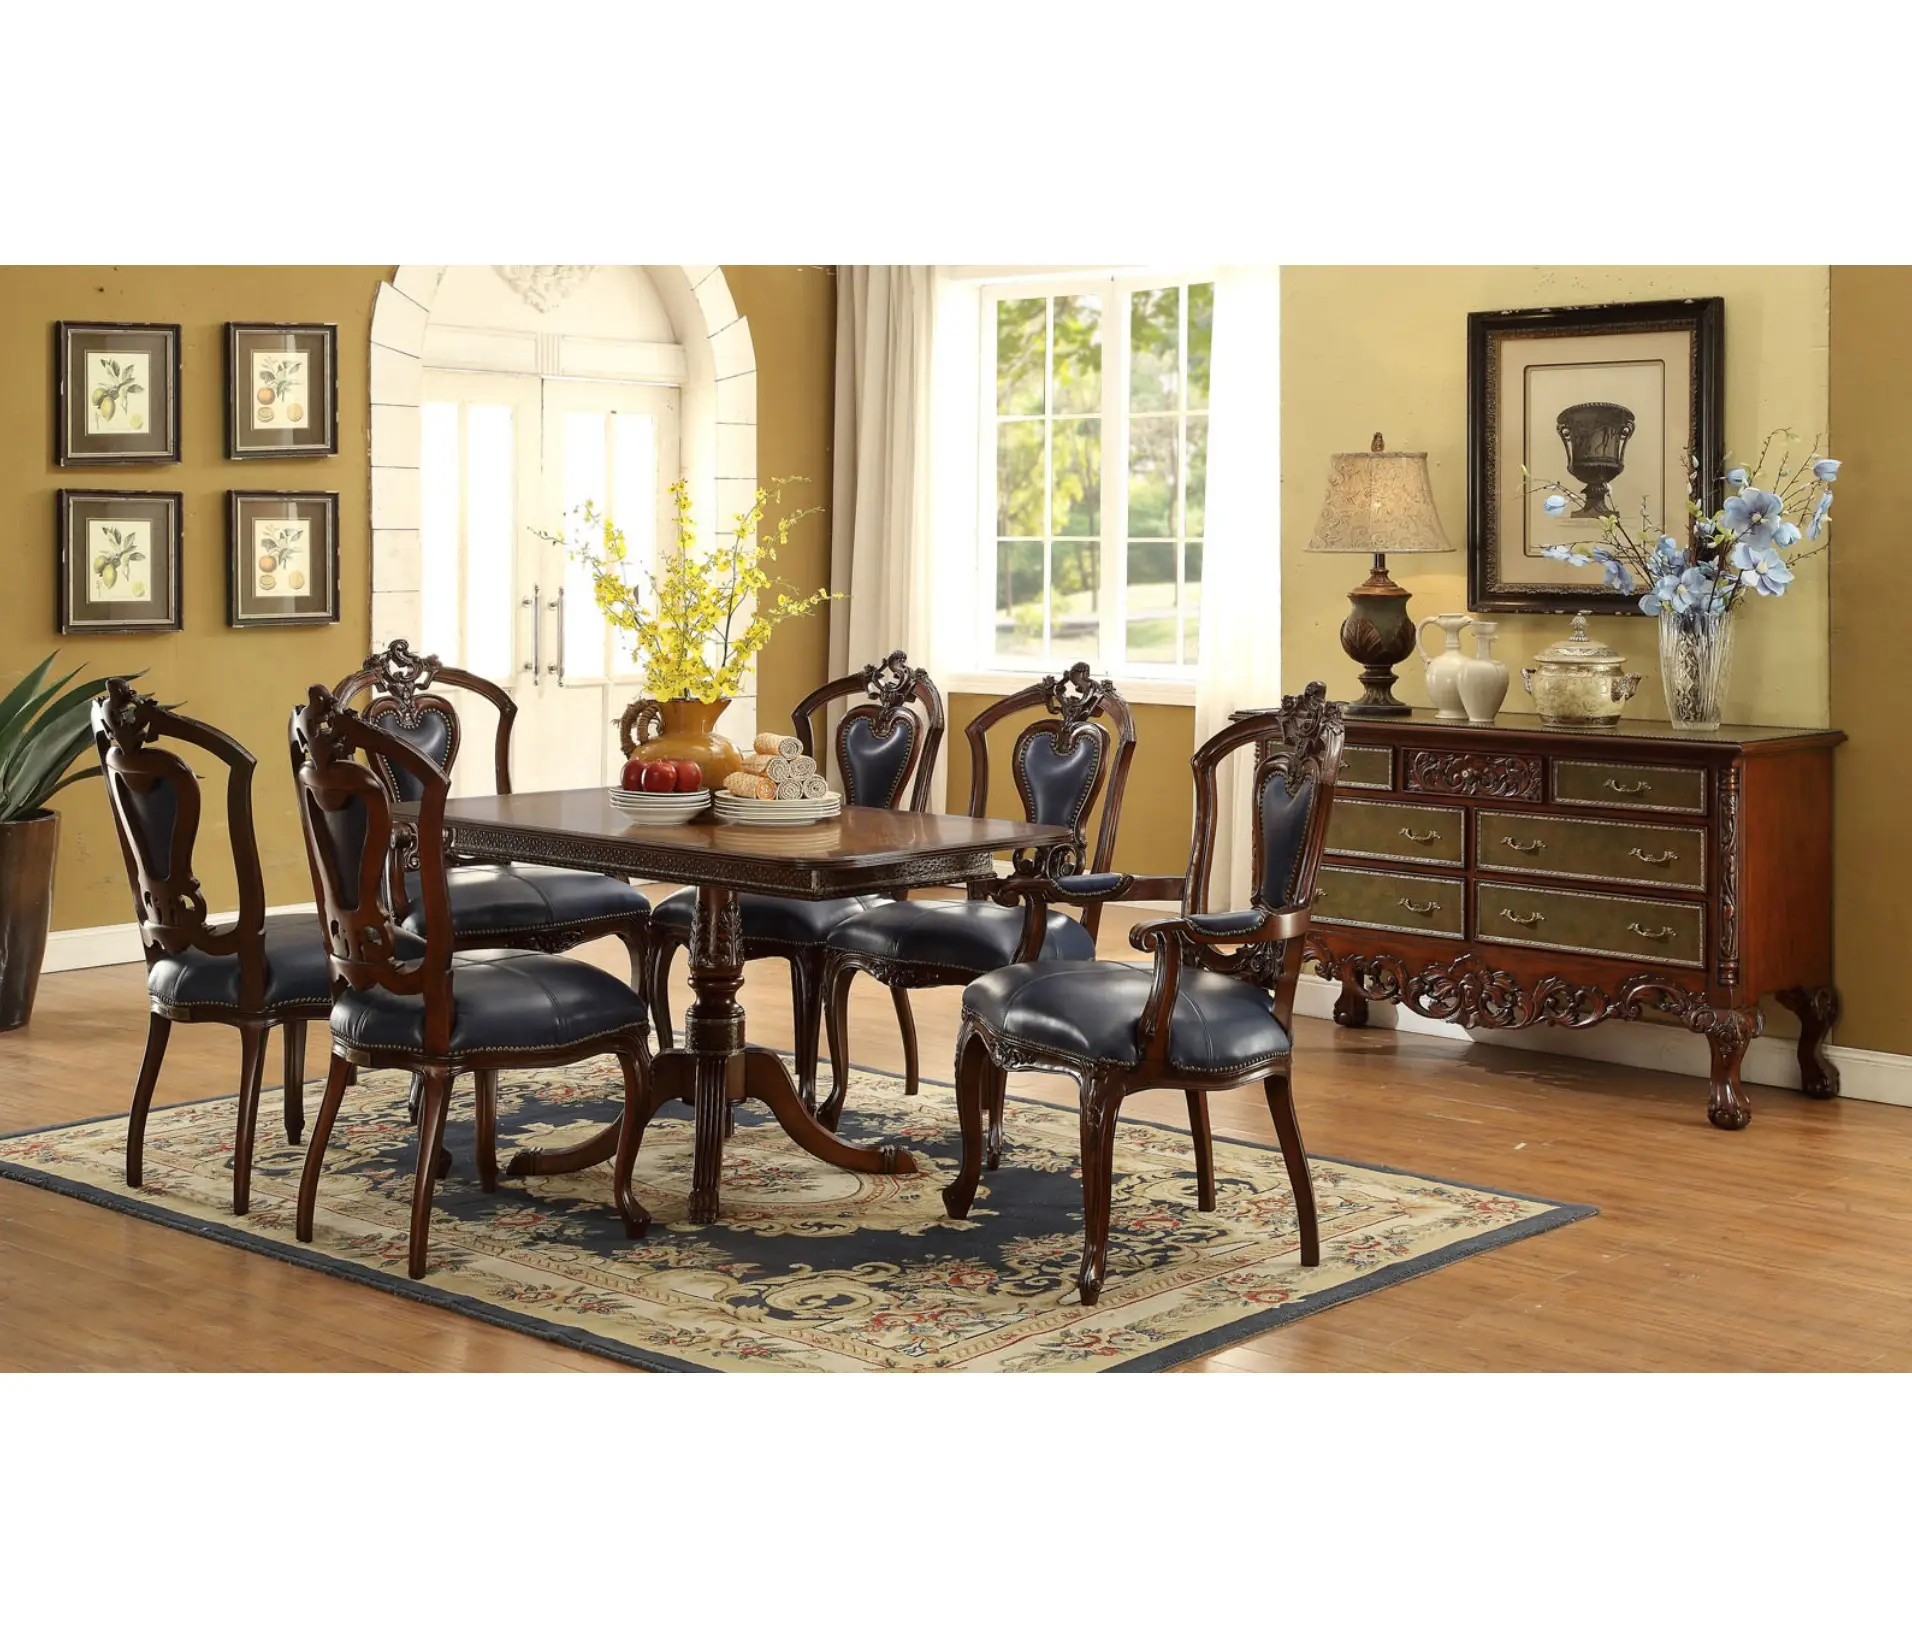 Luxury Hotel Home Furniture Dinner Table Set Antique Style Mahogany Wooden Wedding Chair Dining Room Set Classic Type GGM324